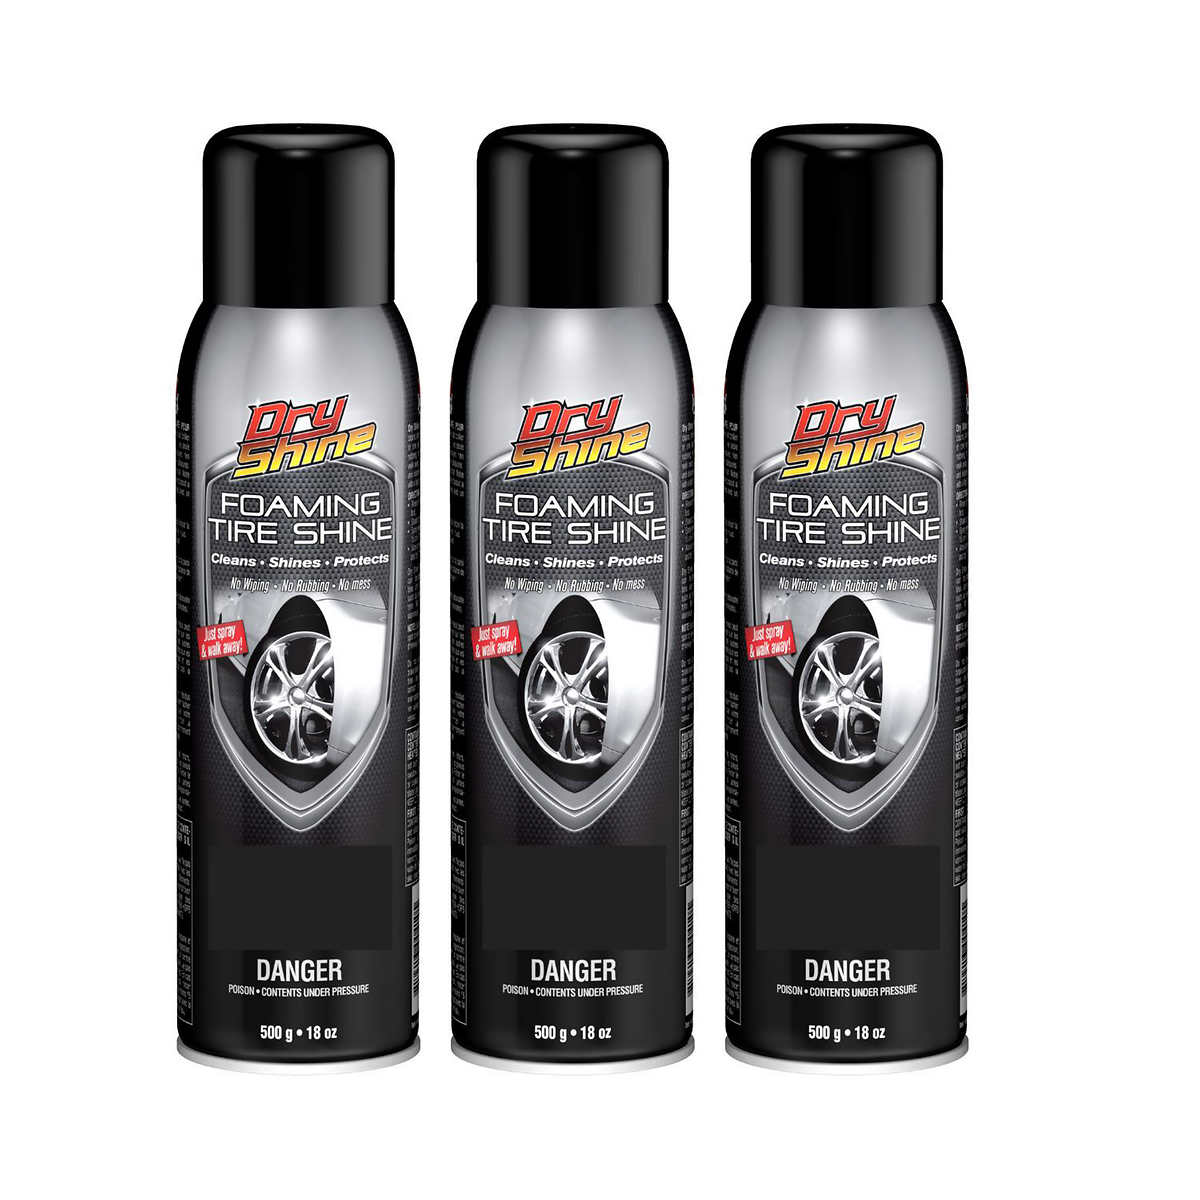 Effective tire glitter spray At Low Prices 